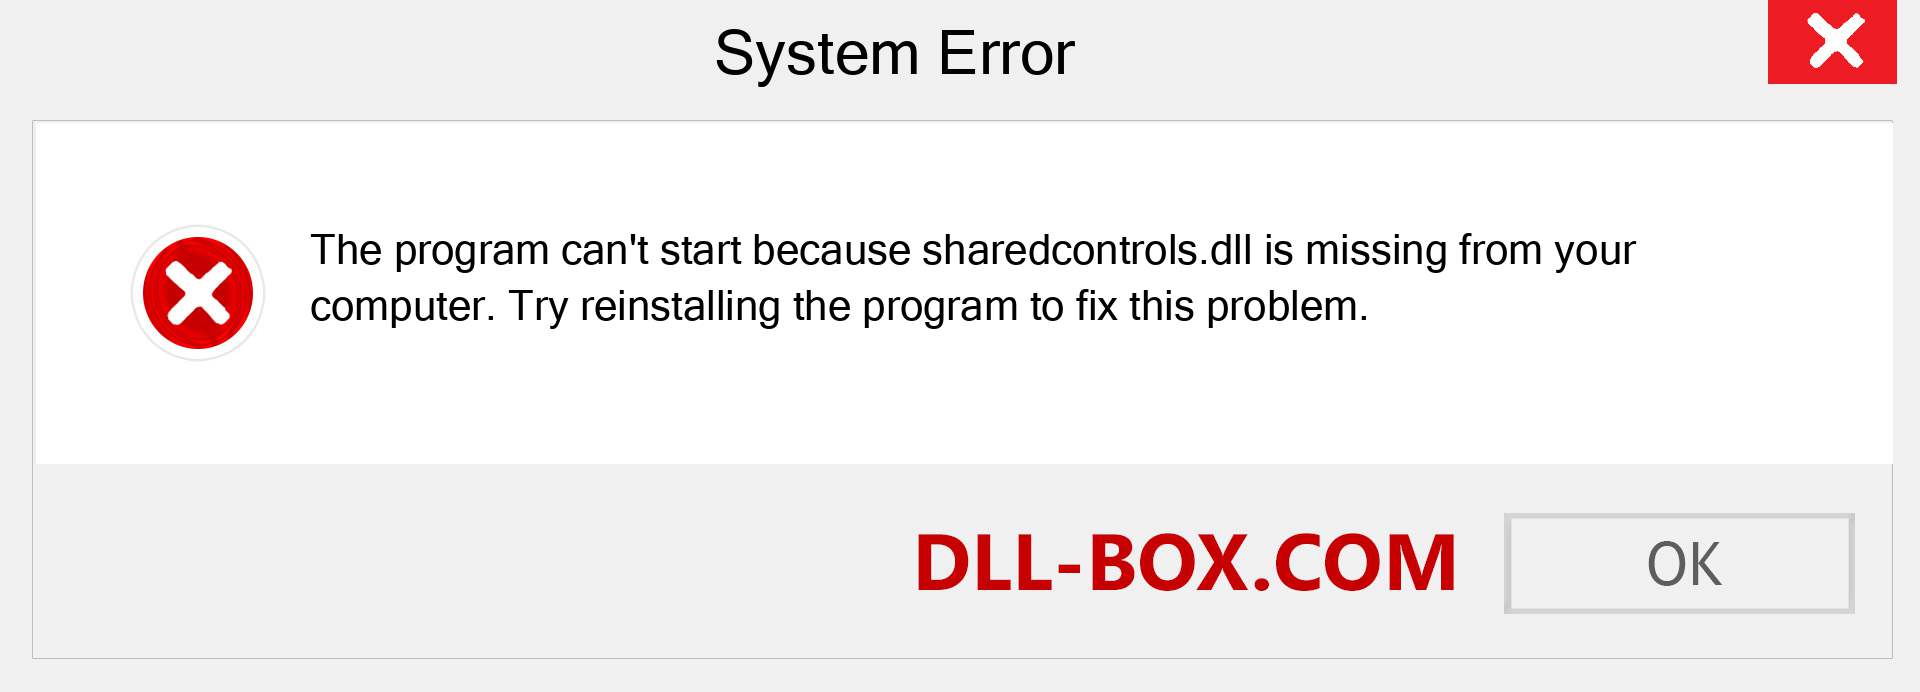  sharedcontrols.dll file is missing?. Download for Windows 7, 8, 10 - Fix  sharedcontrols dll Missing Error on Windows, photos, images